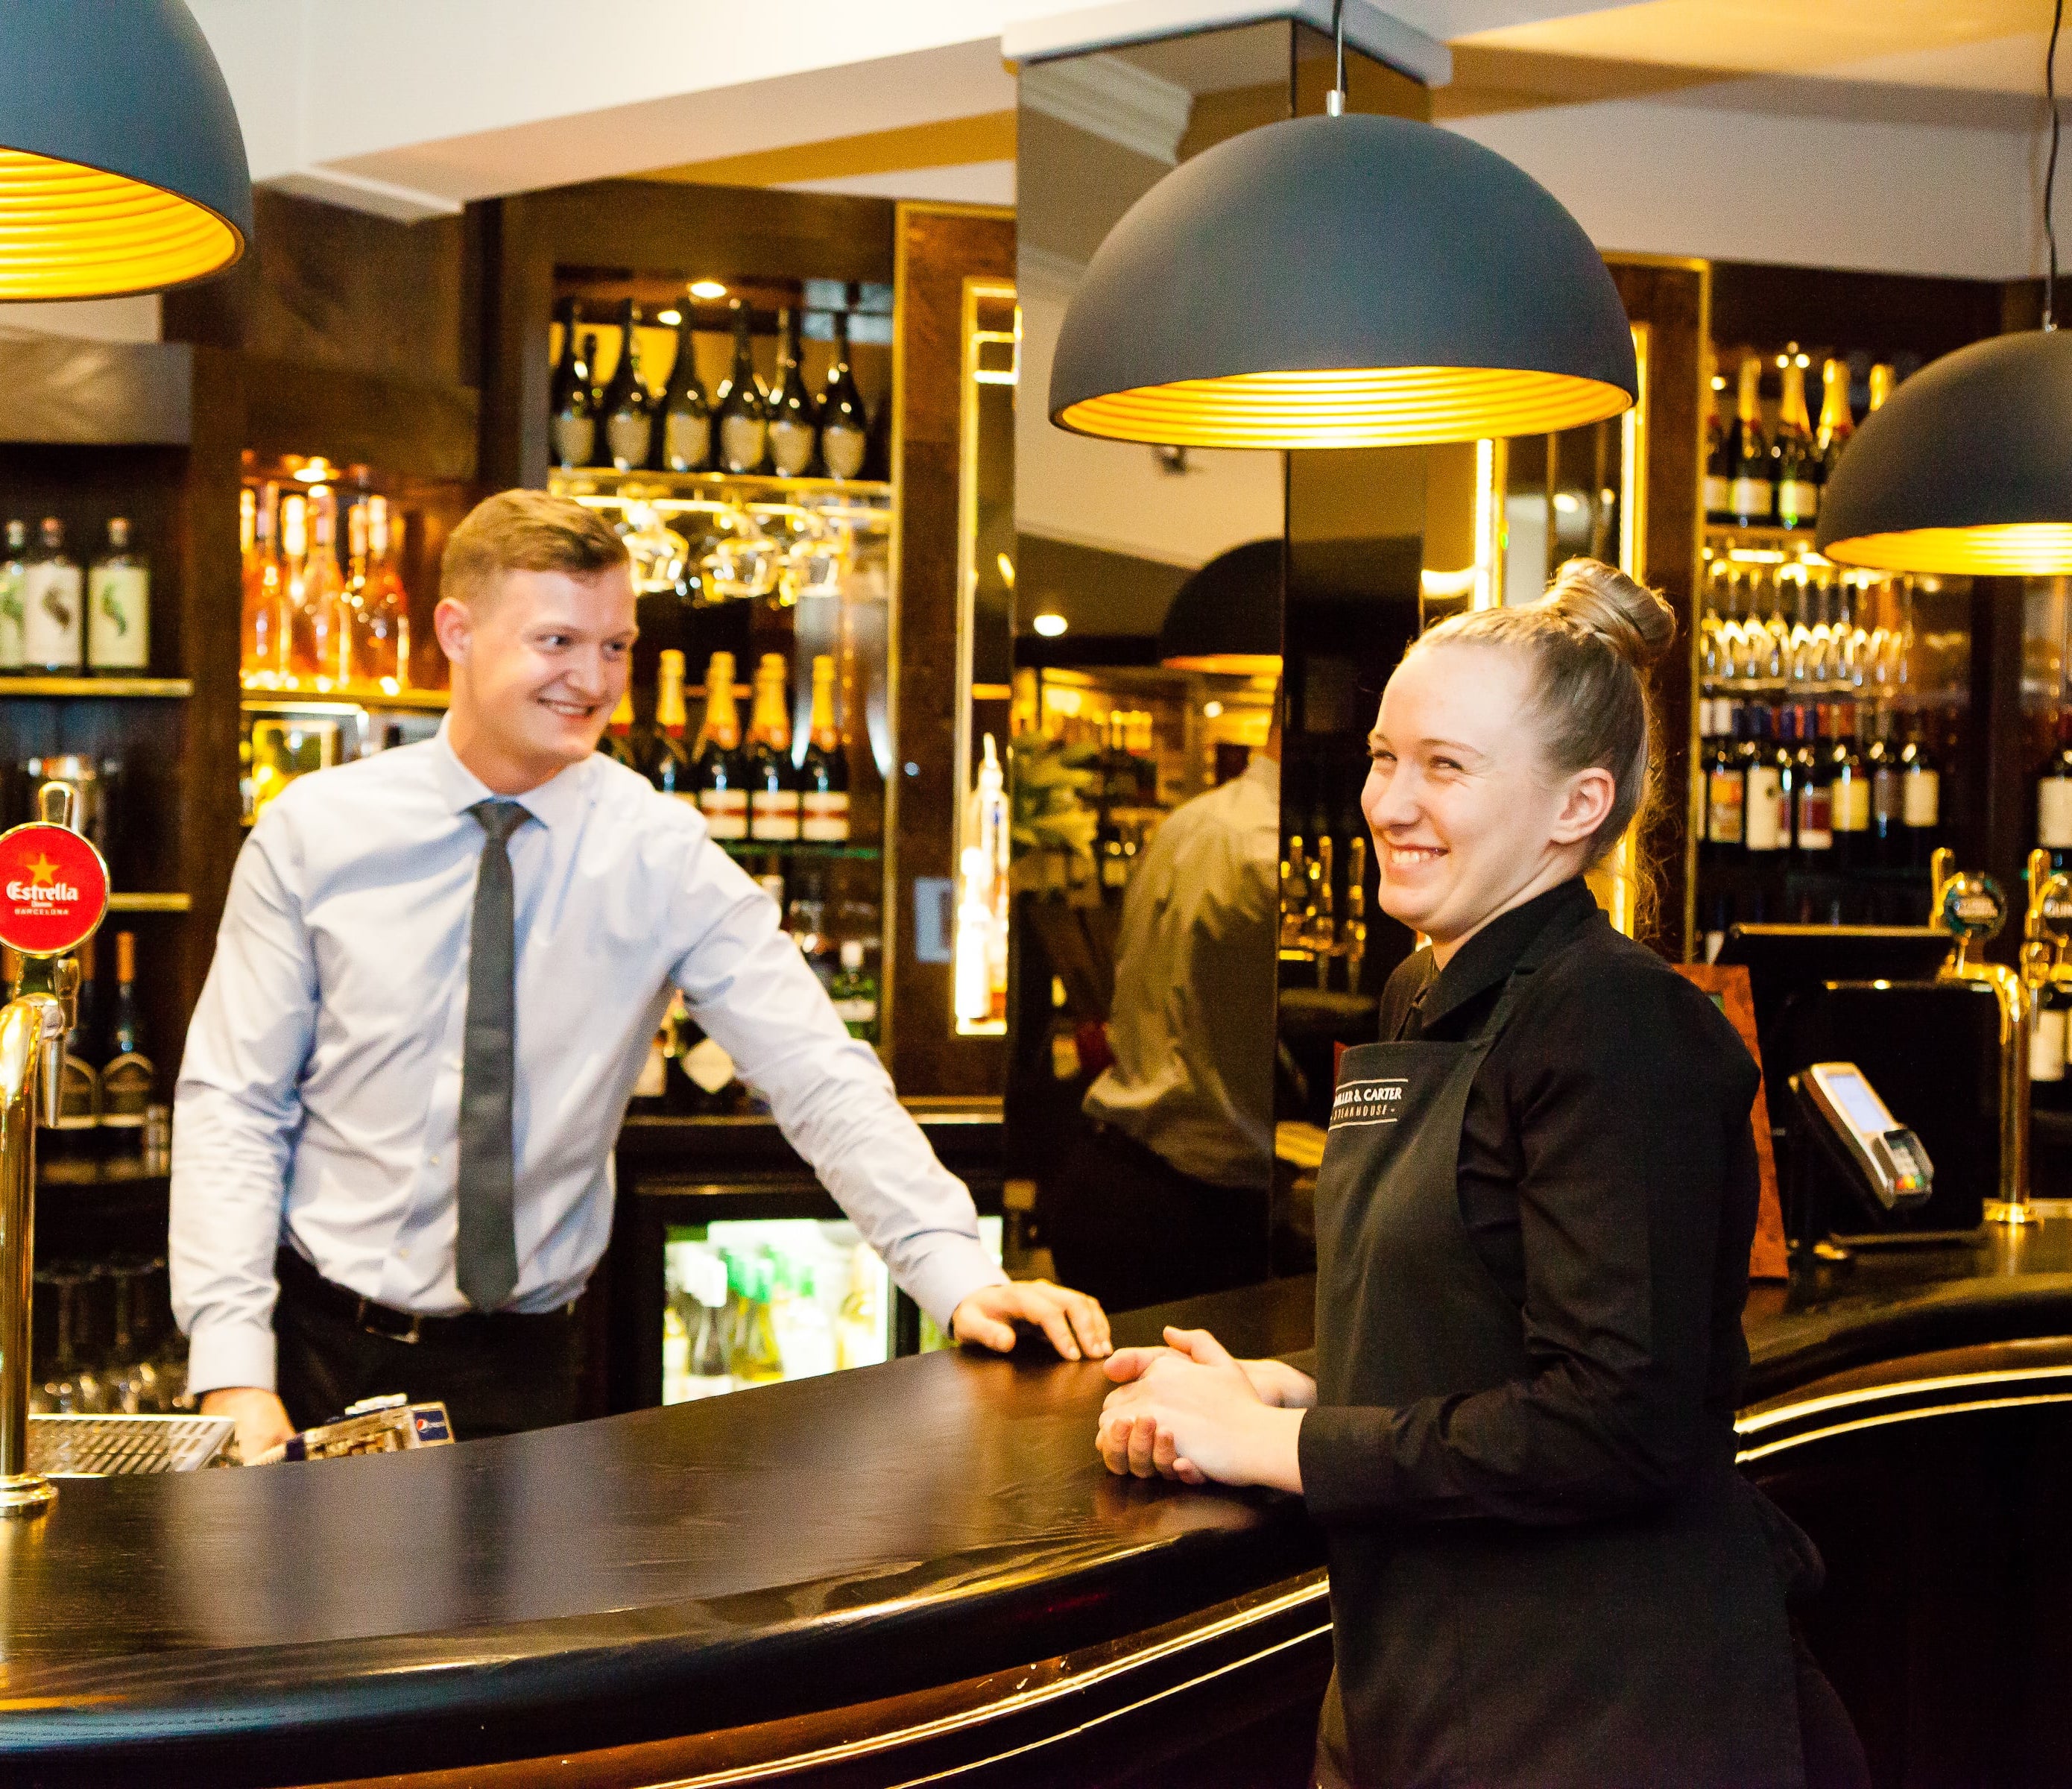 waiter and manager standing at pub bar